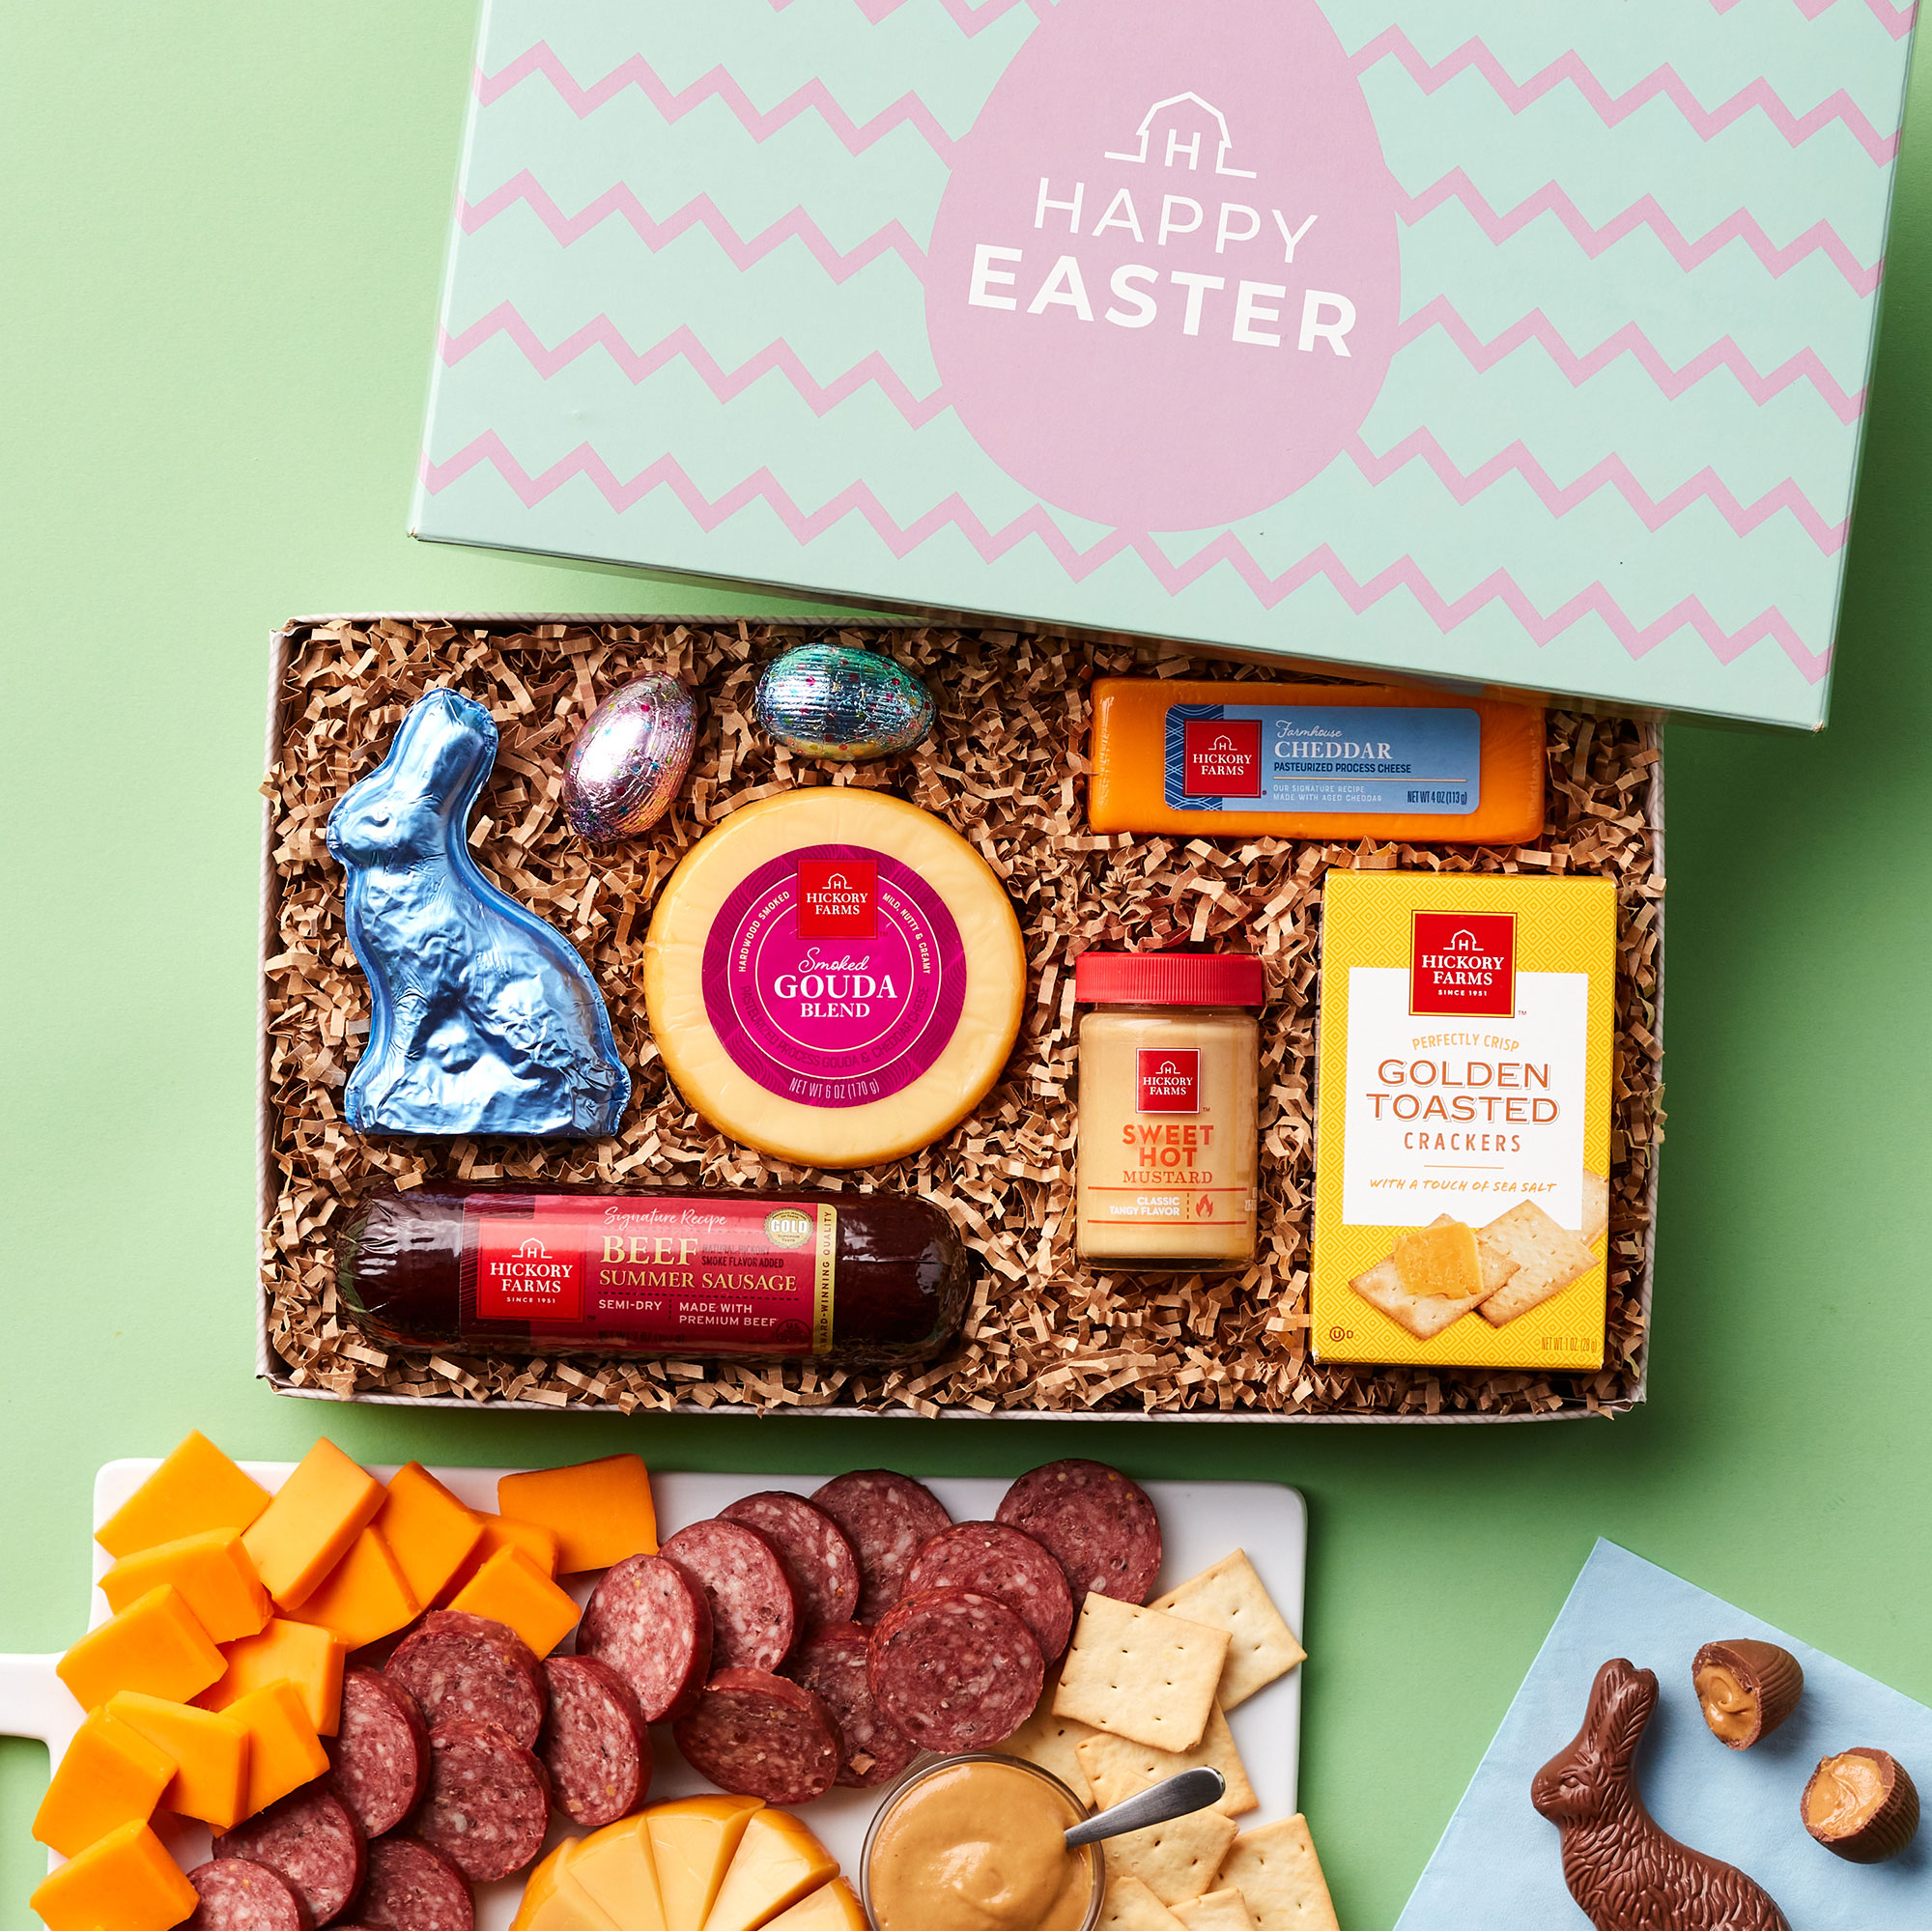 https://www.hickoryfarms.com/on/demandware.static/-/Sites-Web-Master-Catalog/default/dw5df46f3b/images/products/happy-easter-gift-box-006995-1.jpg